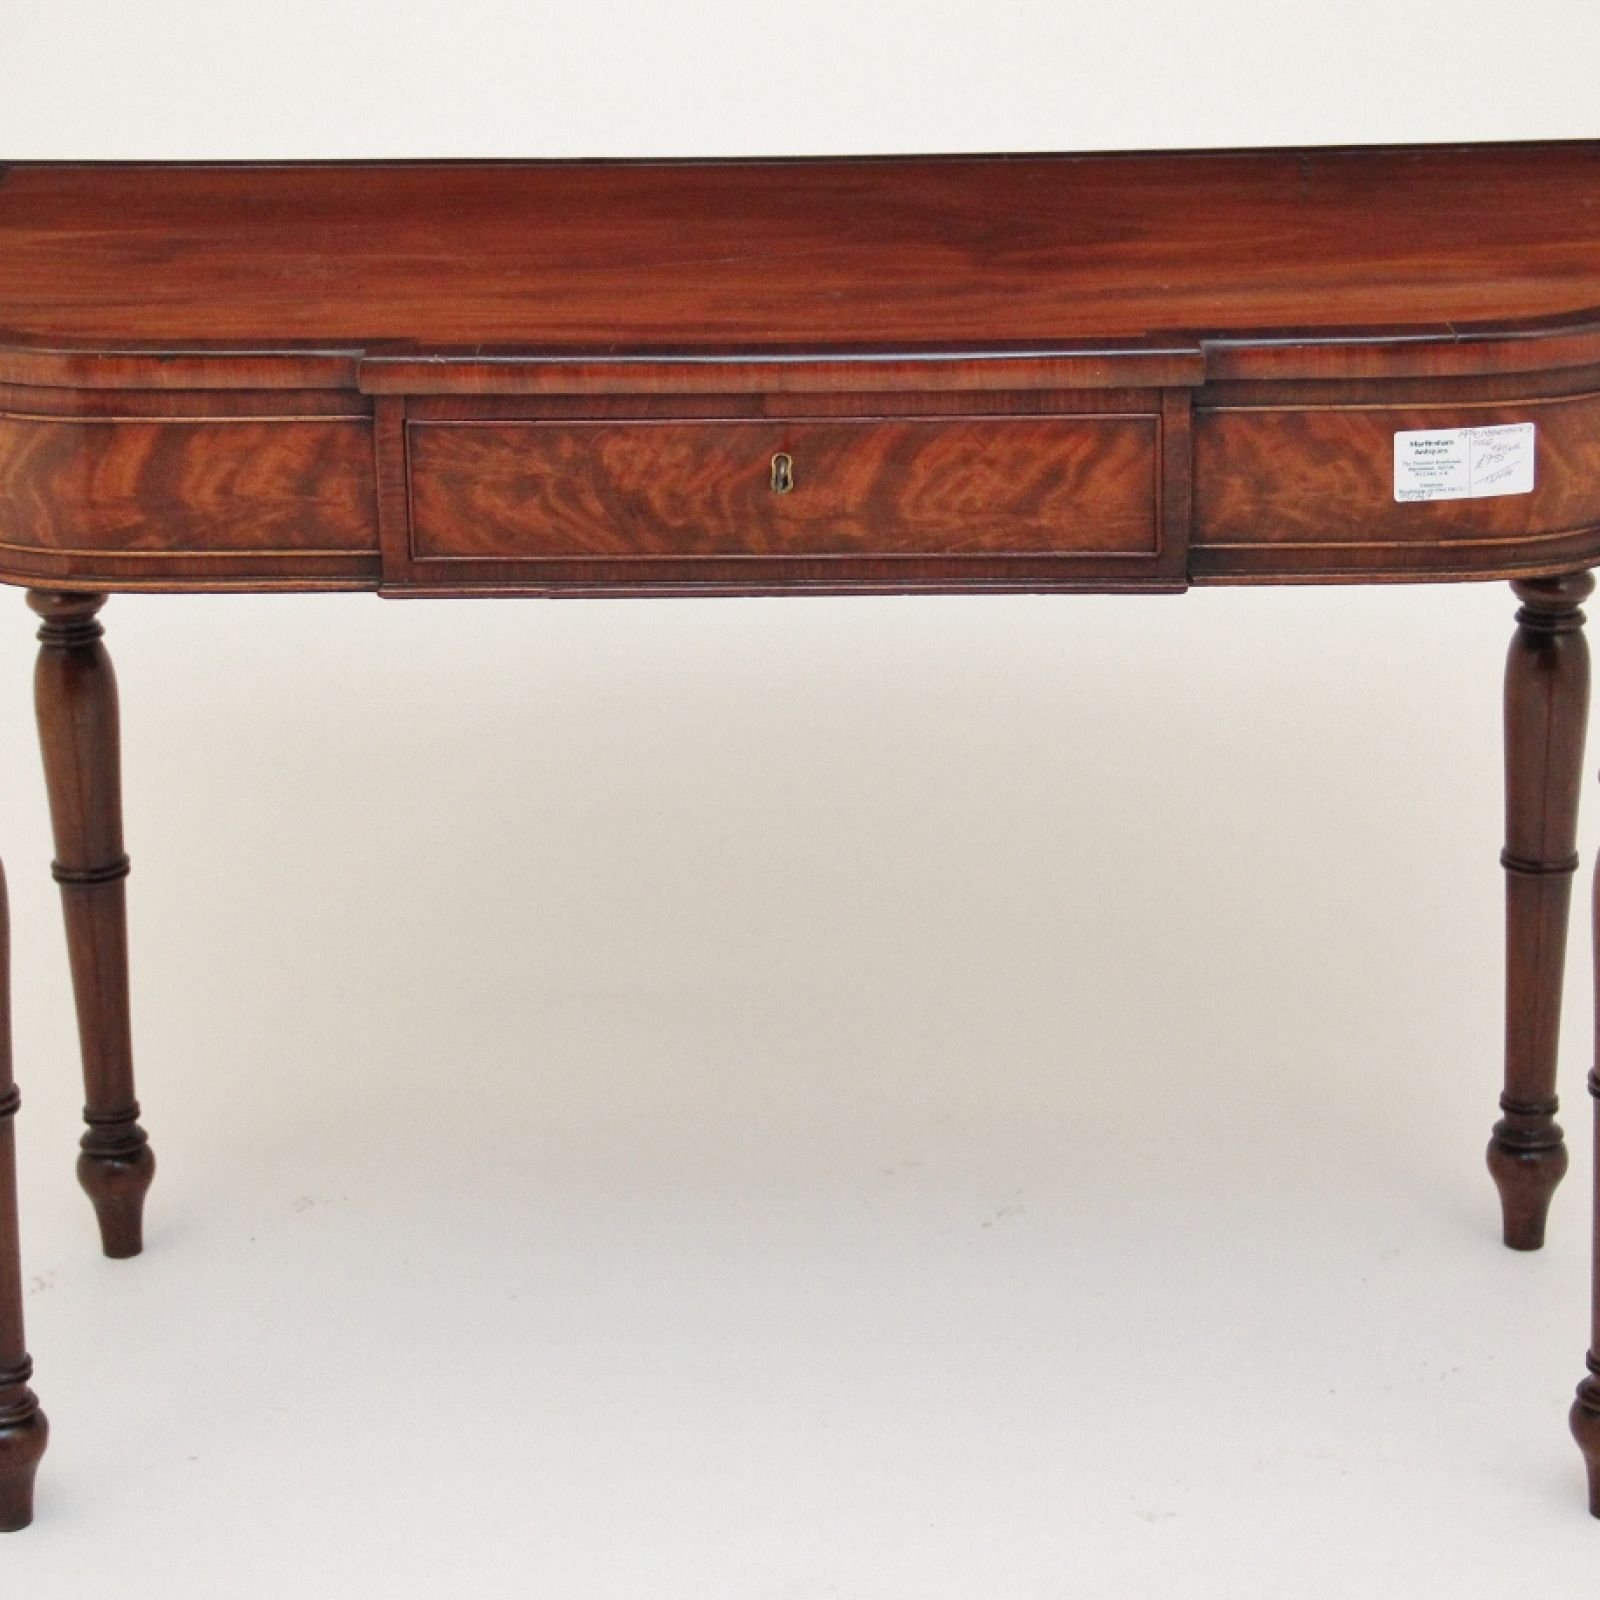 19th Century Mahogany Side Table With A Single Drawer